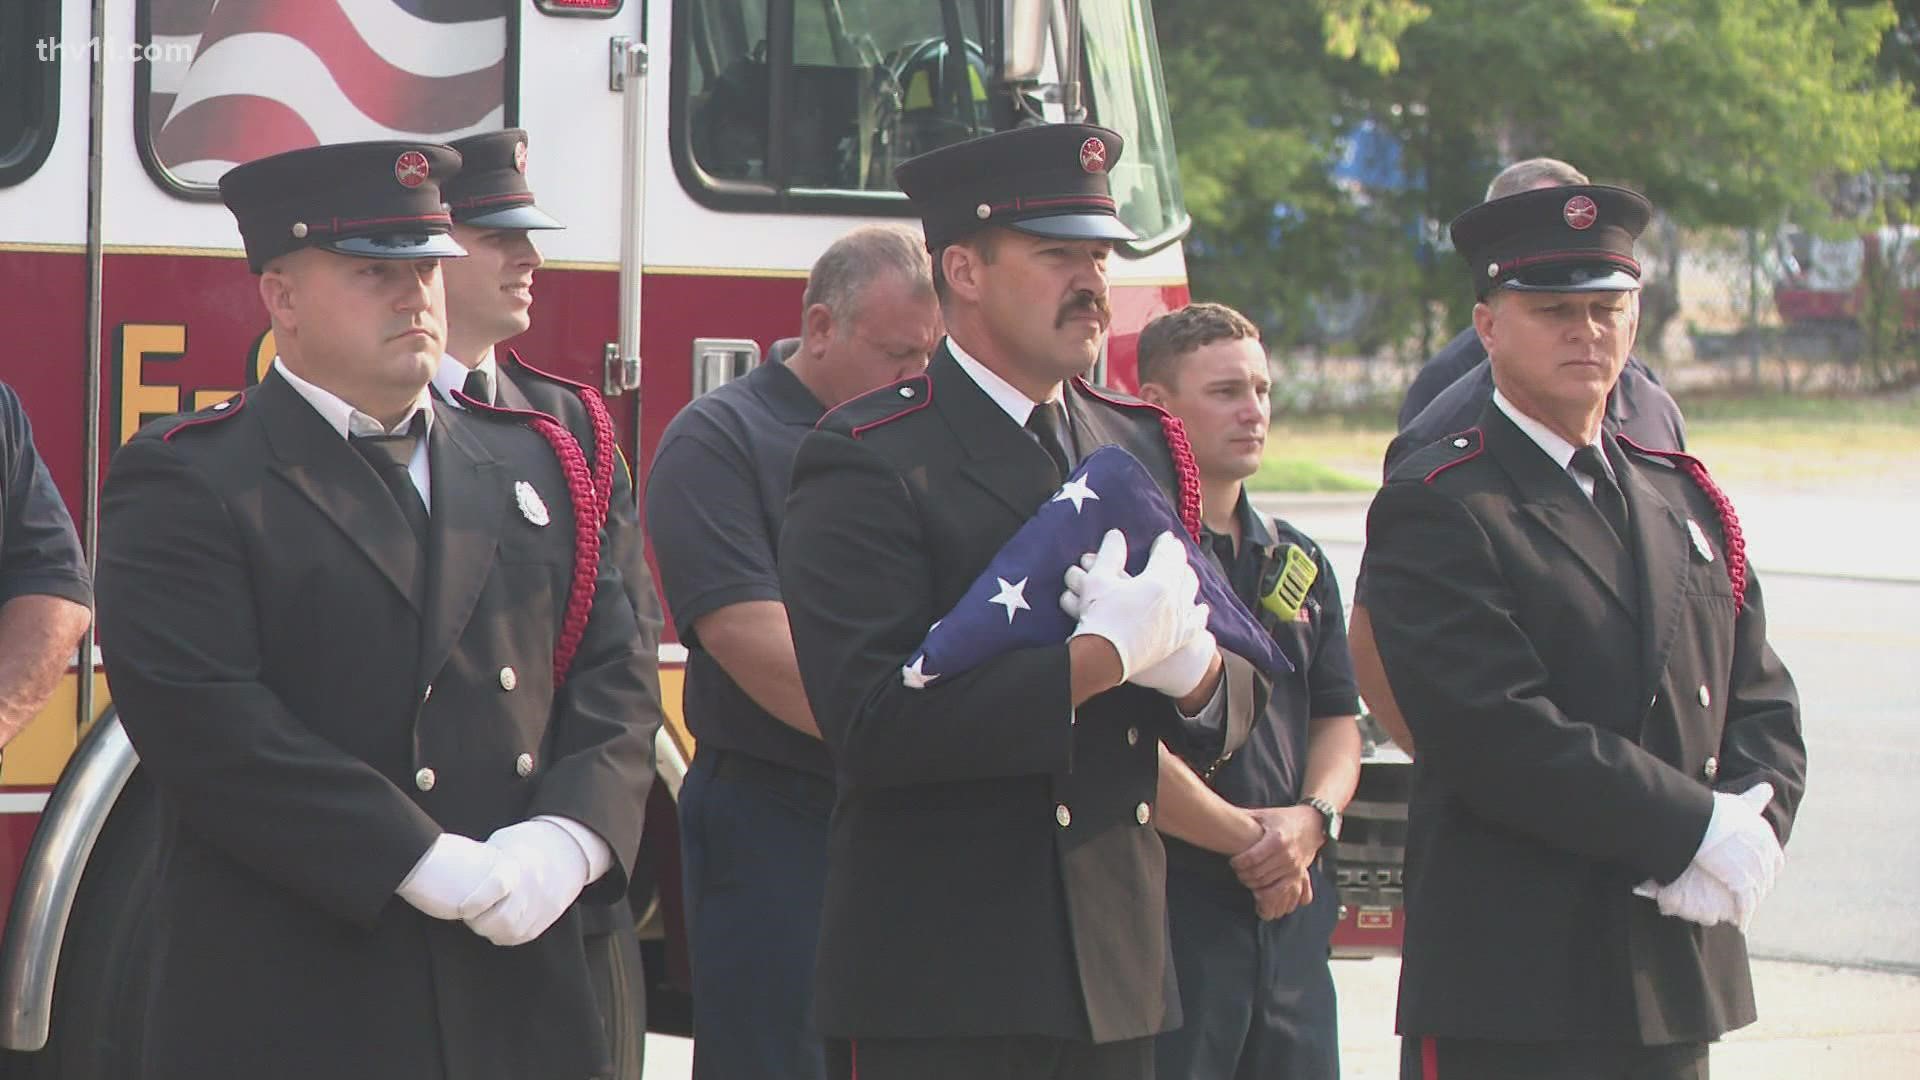 LRFD gathered to honor the 343 firefighters that lost their lives in the attack.